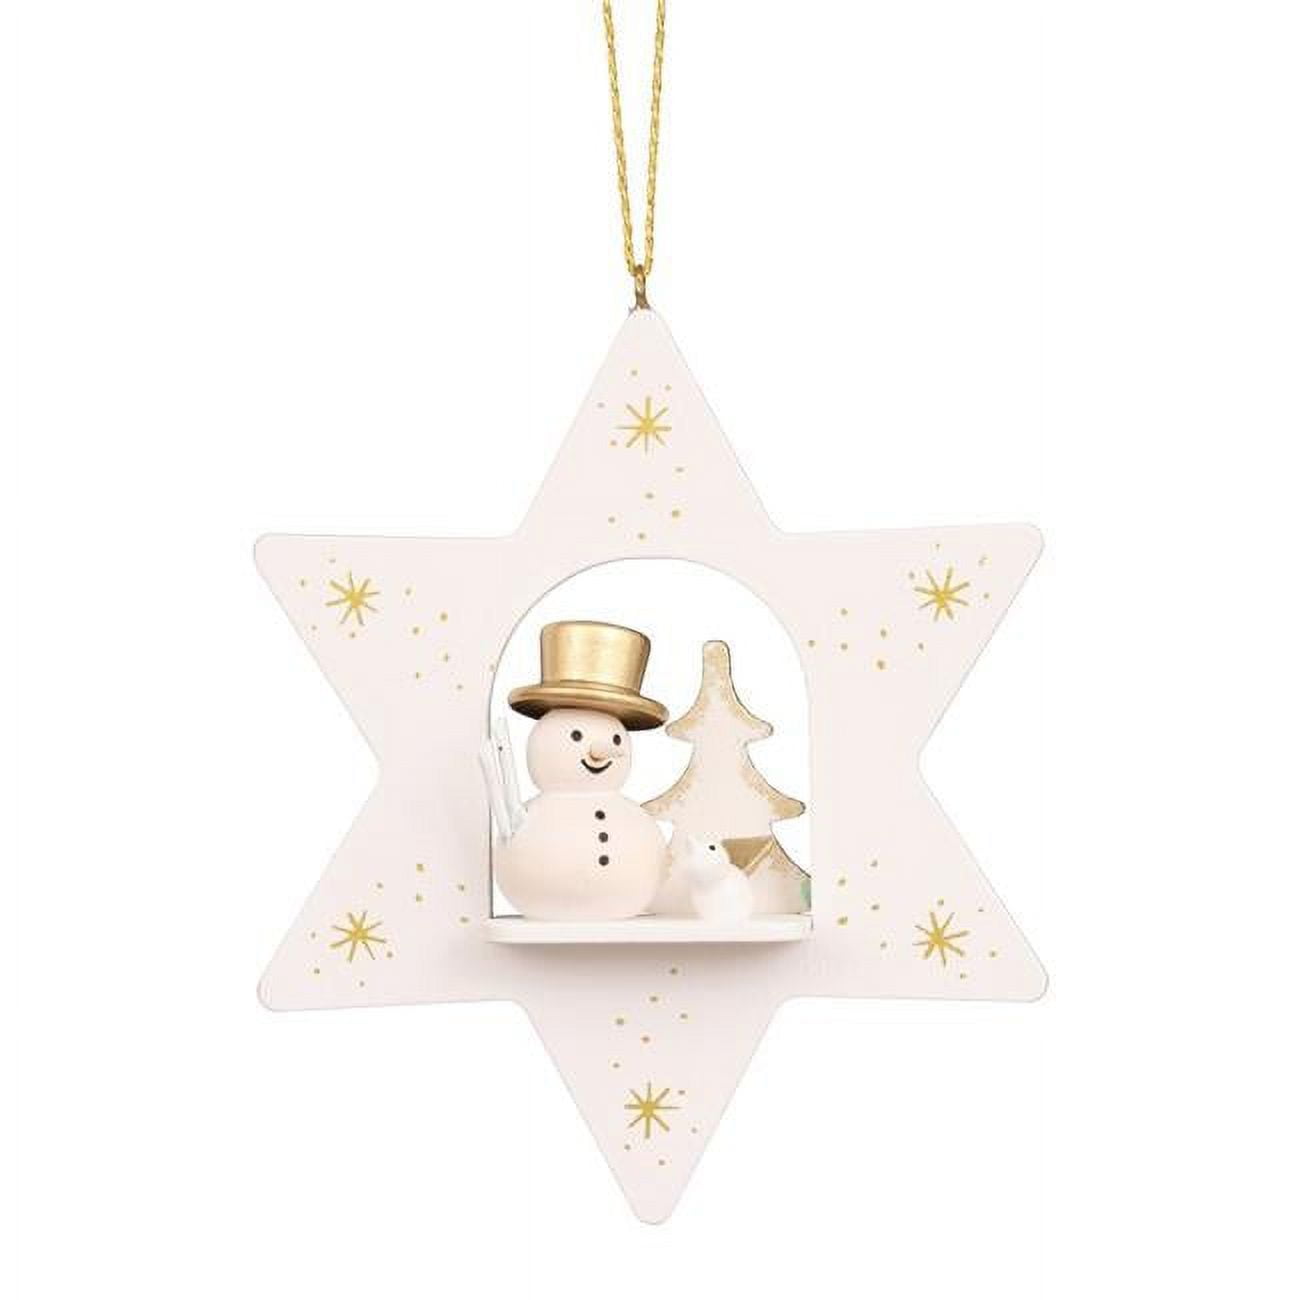 Picture of Alexander Taron 10-0665 Christian Ulbricht Ornament - White Star with Snowman - 4 x 3.25 x 1 in.